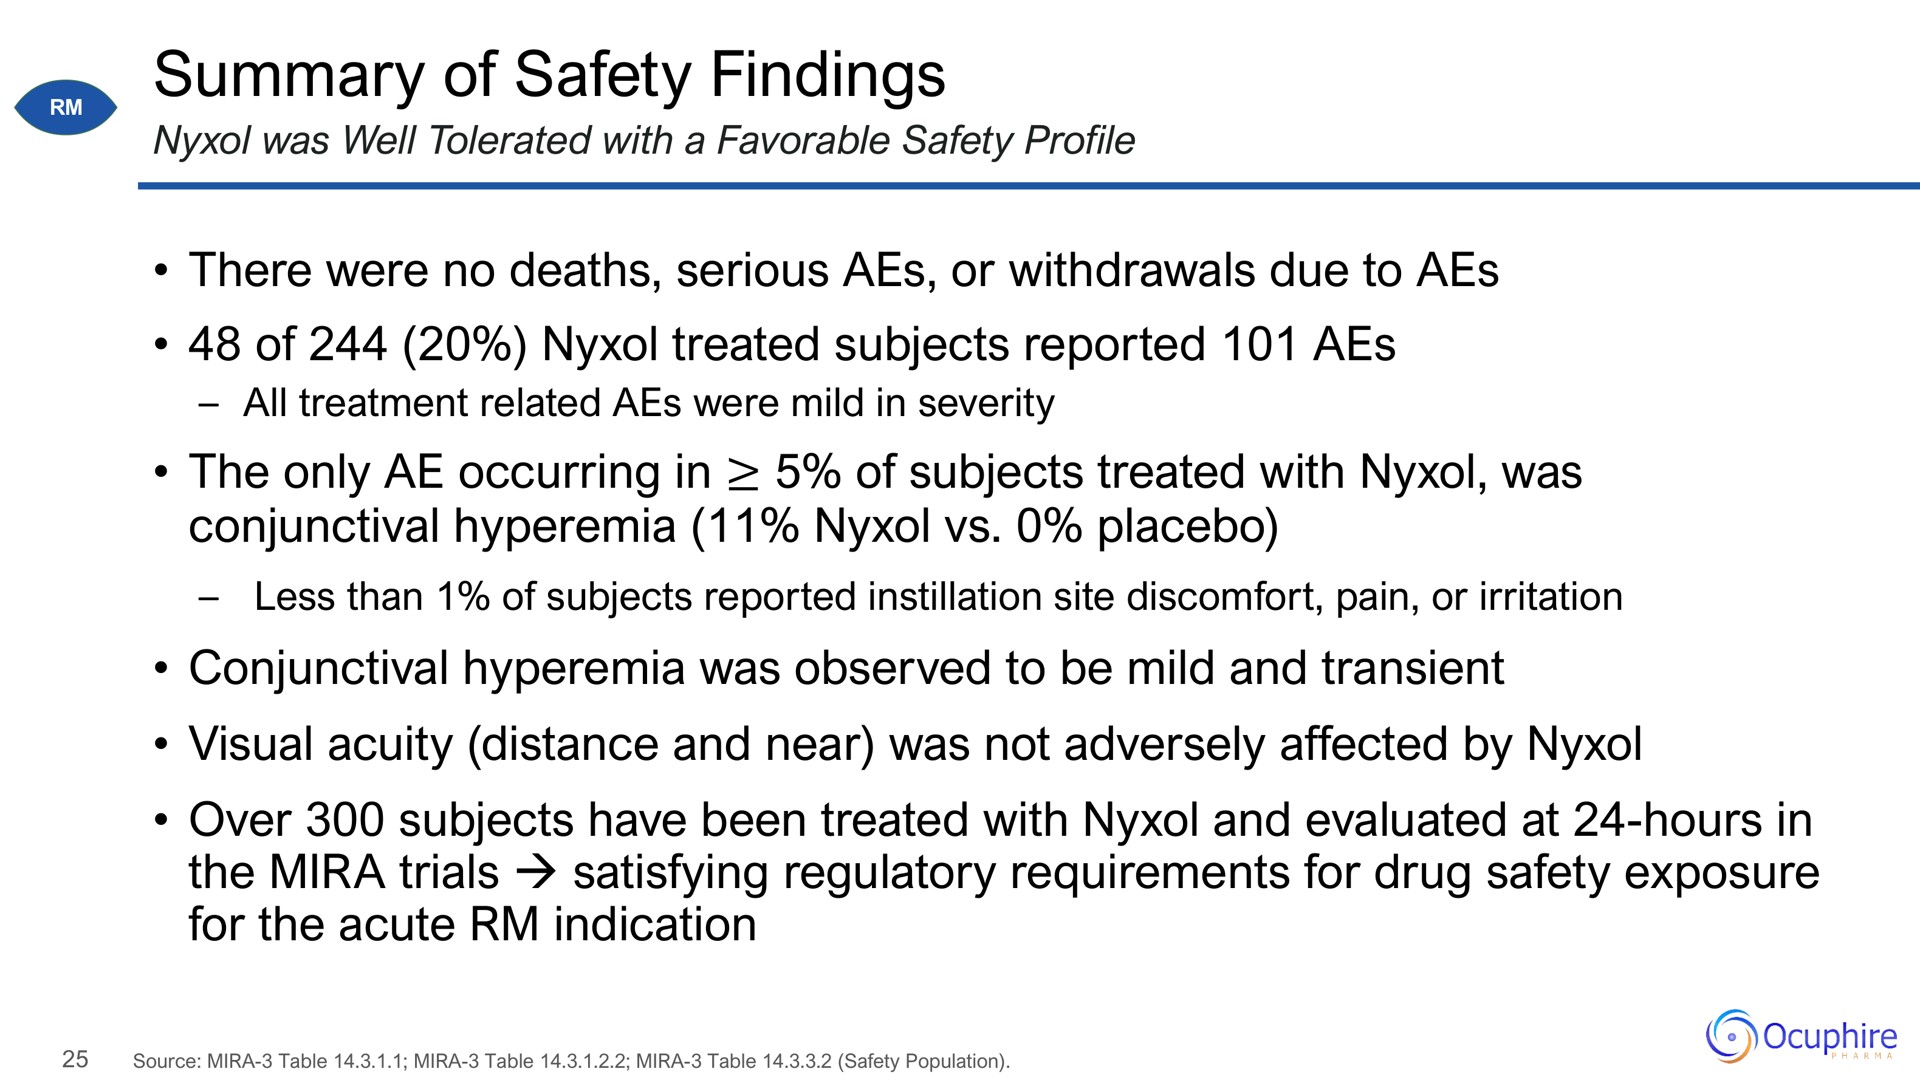 summary of safety findings there were no deaths serious aes or withdrawals due to aes of treated subjects reported aes the only occurring in of subjects treated with was conjunctival hyperemia placebo conjunctival hyperemia was observed to be mild and transient visual acuity distance and near was not adversely affected by over subjects have been treated with and evaluated at hours in the trials satisfying regulatory requirements for drug safety exposure for the acute indication | Ocuphire Pharma